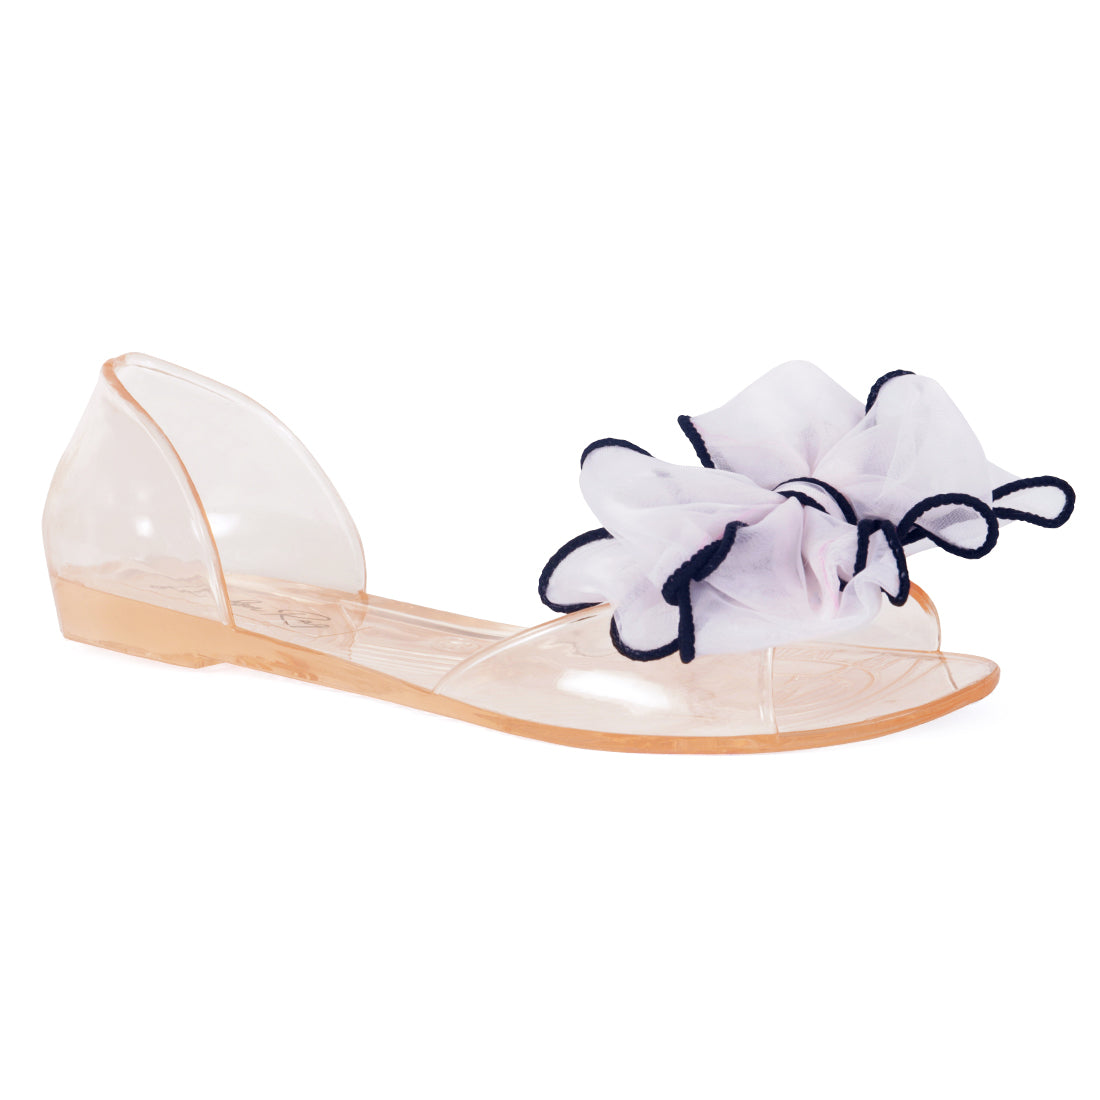 Bow on Top Jelly Flats in Beige - Beige